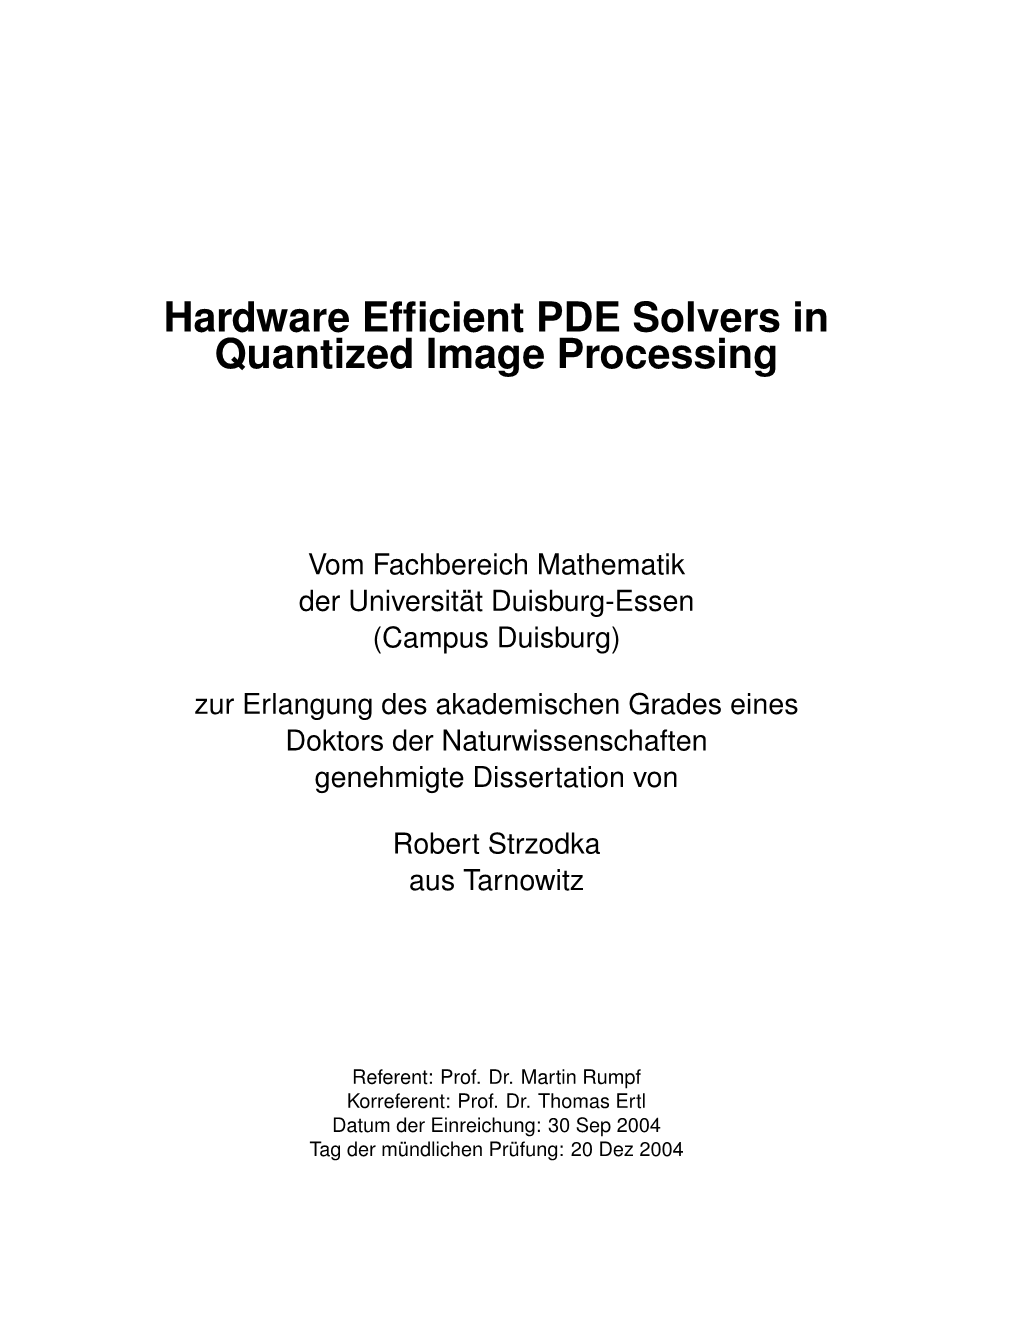 Hardware Efficient PDE Solvers in Quantized Image Processing